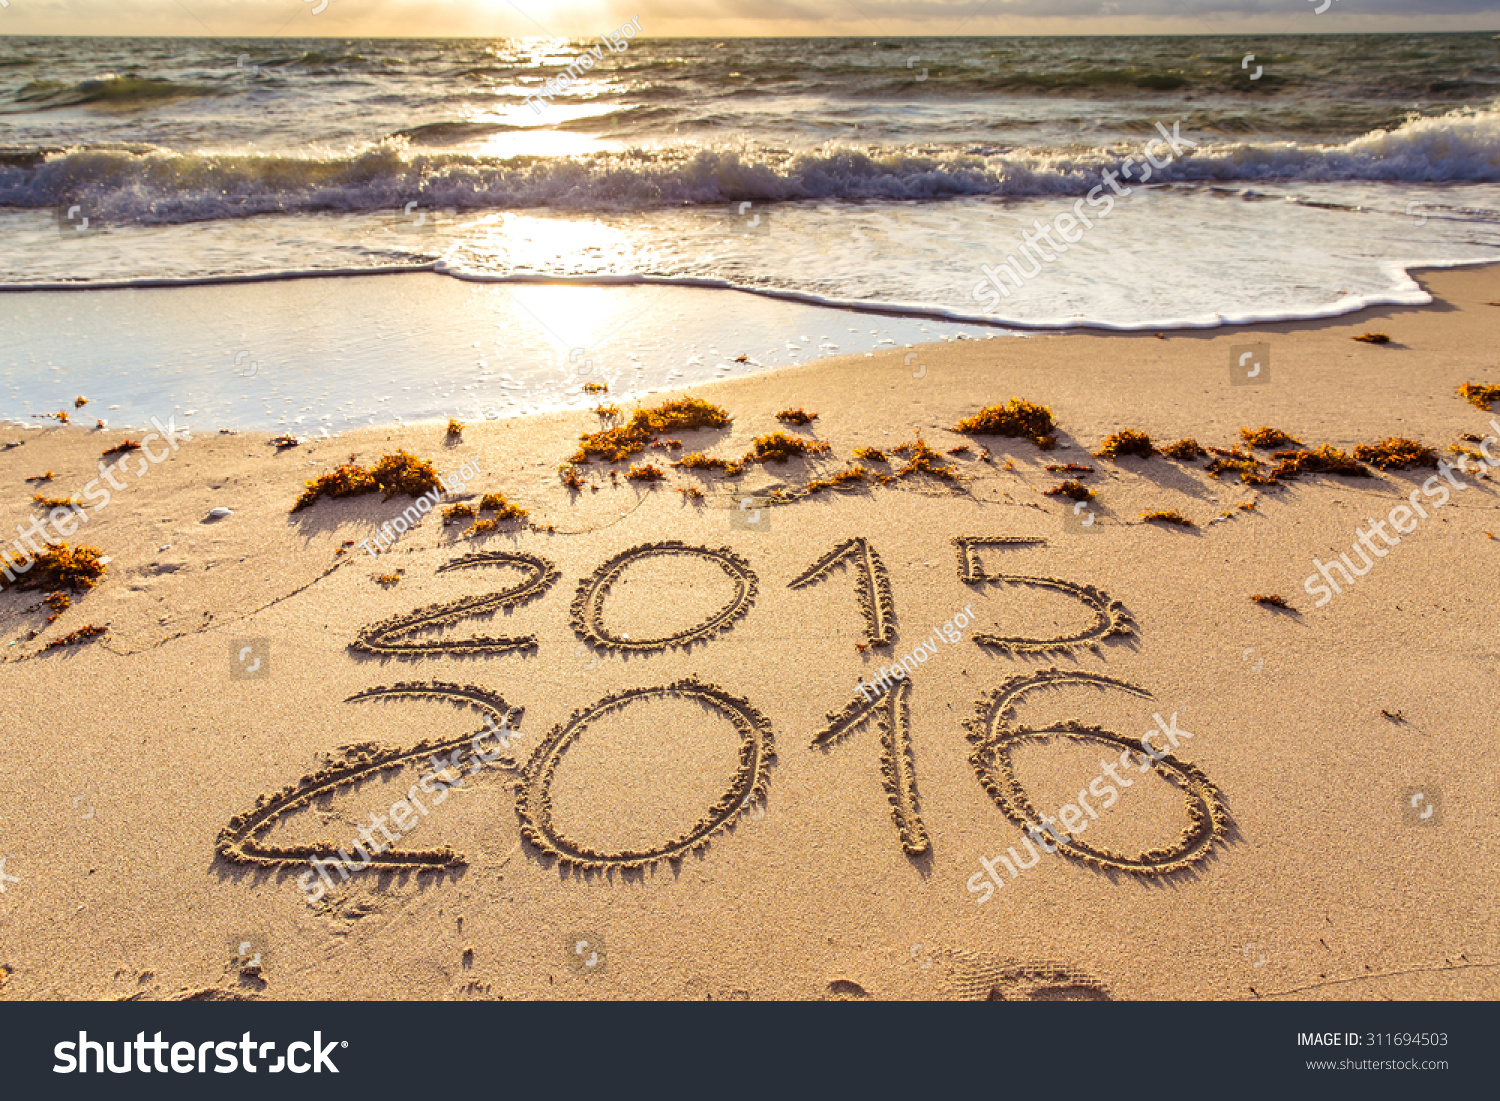 New Year 2016 is coming concept. 2015 and 2016 signs on a beach sand #311694503